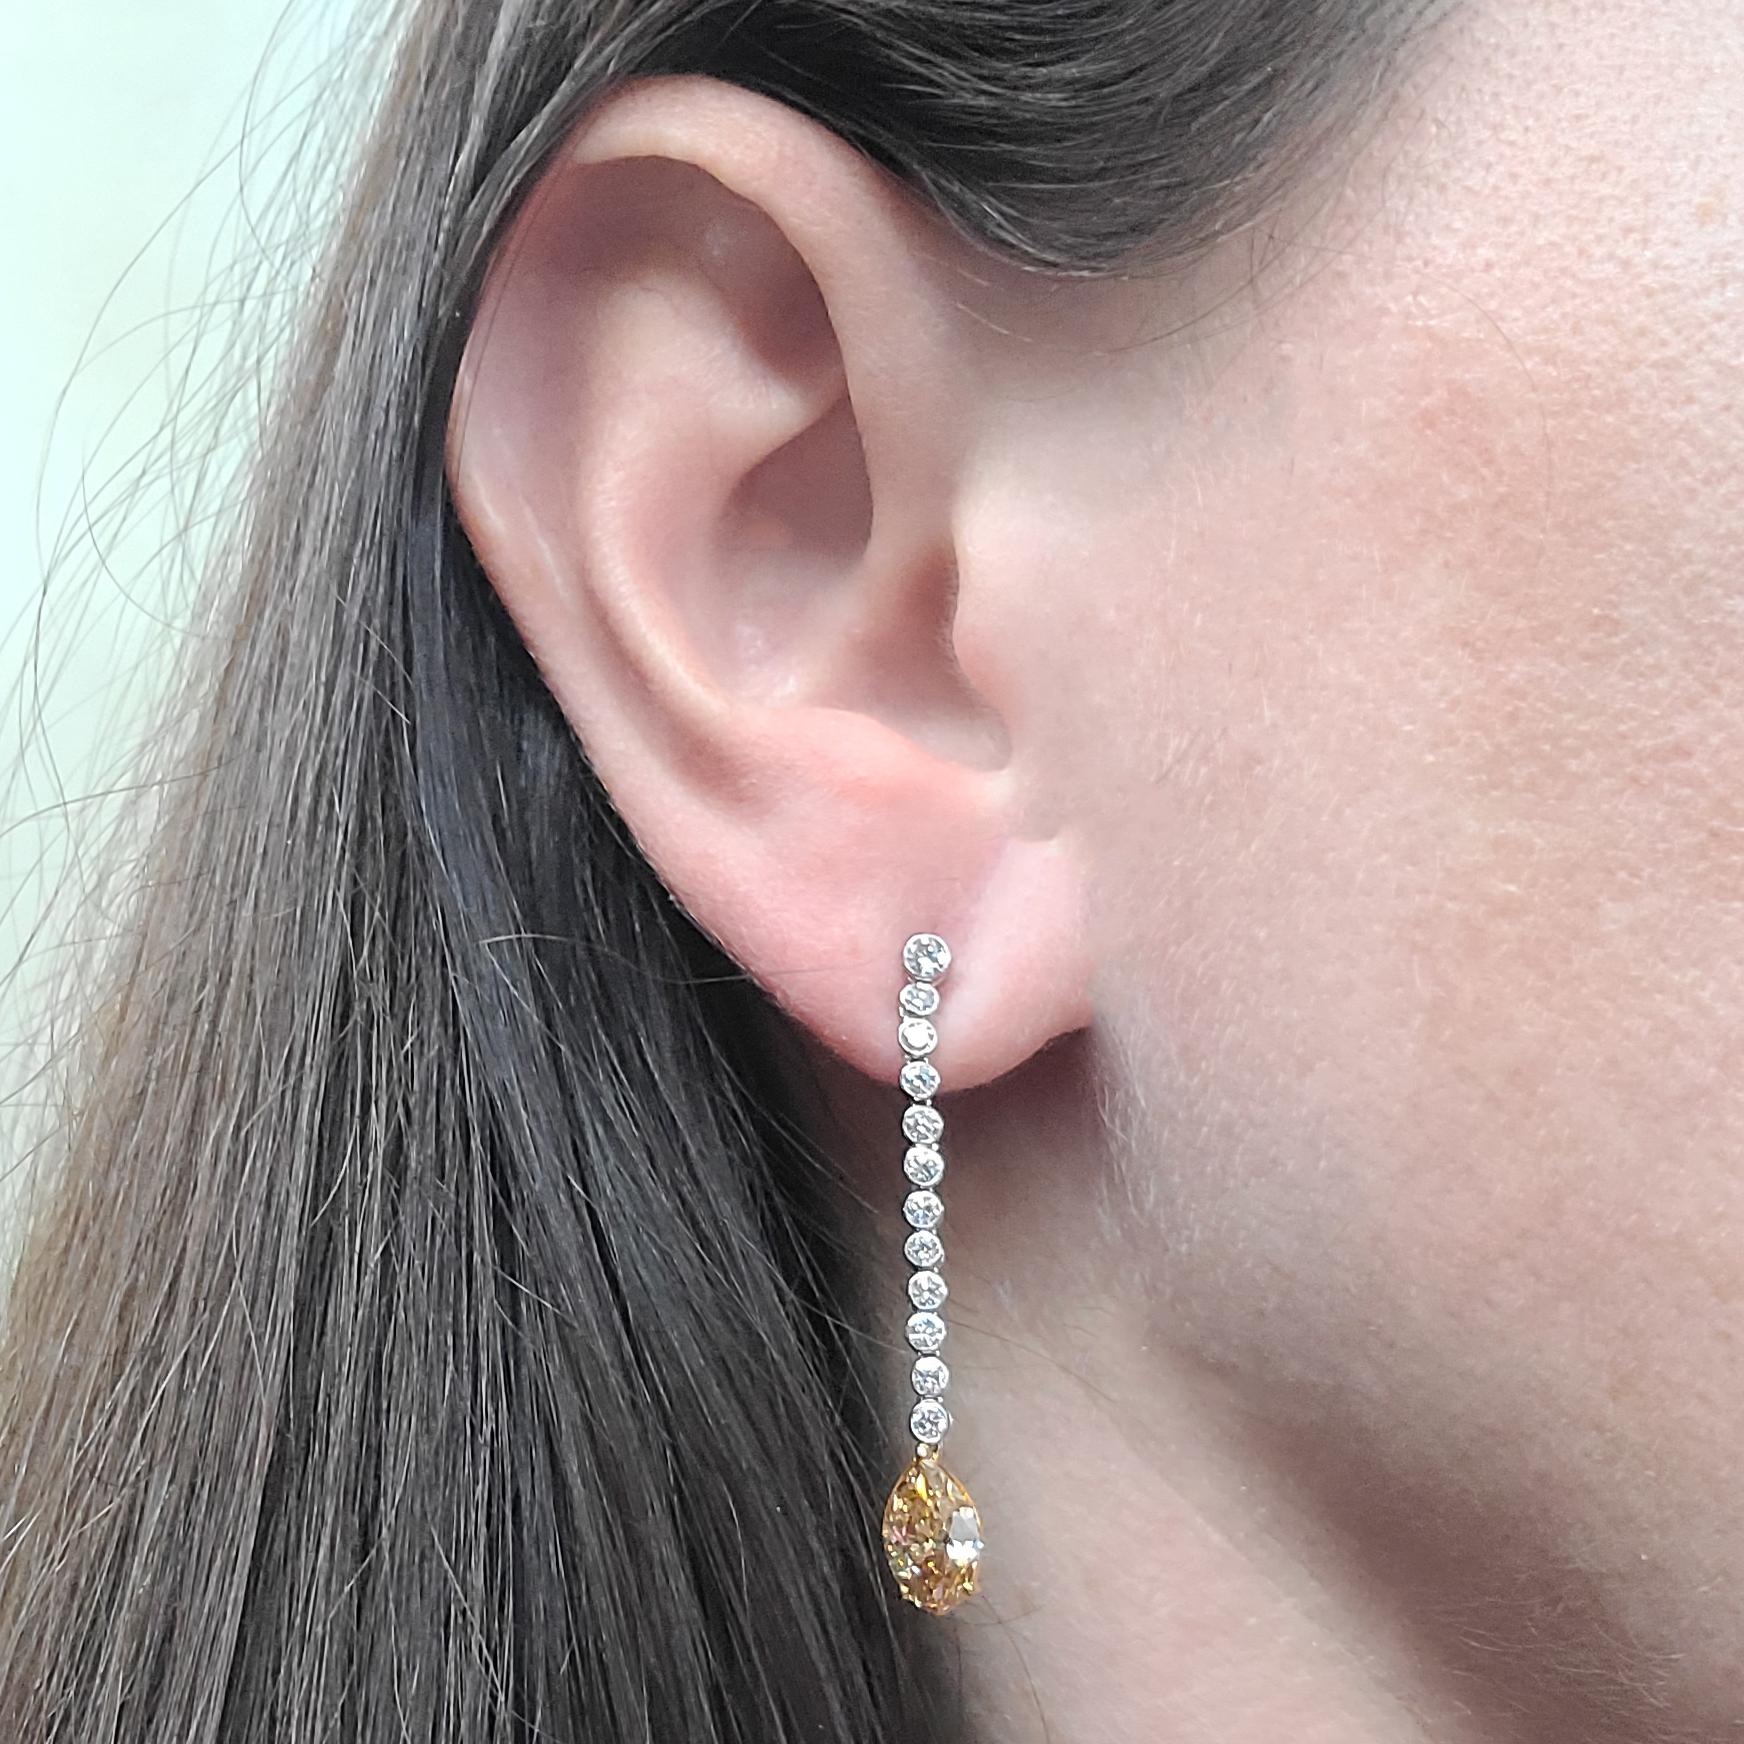 Platinum & 18 Karat Yellow Gold Drop Earrings Featuring 2 Prong-set Marquise Cut Diamonds Of Fancy Brownish Orange Color & VS/SI Clarity Totaling 1.97 Carats. 24 Additional Bezel-Set Round Brilliant Cut Diamonds Of VS Clarity & G Color Total 0.86